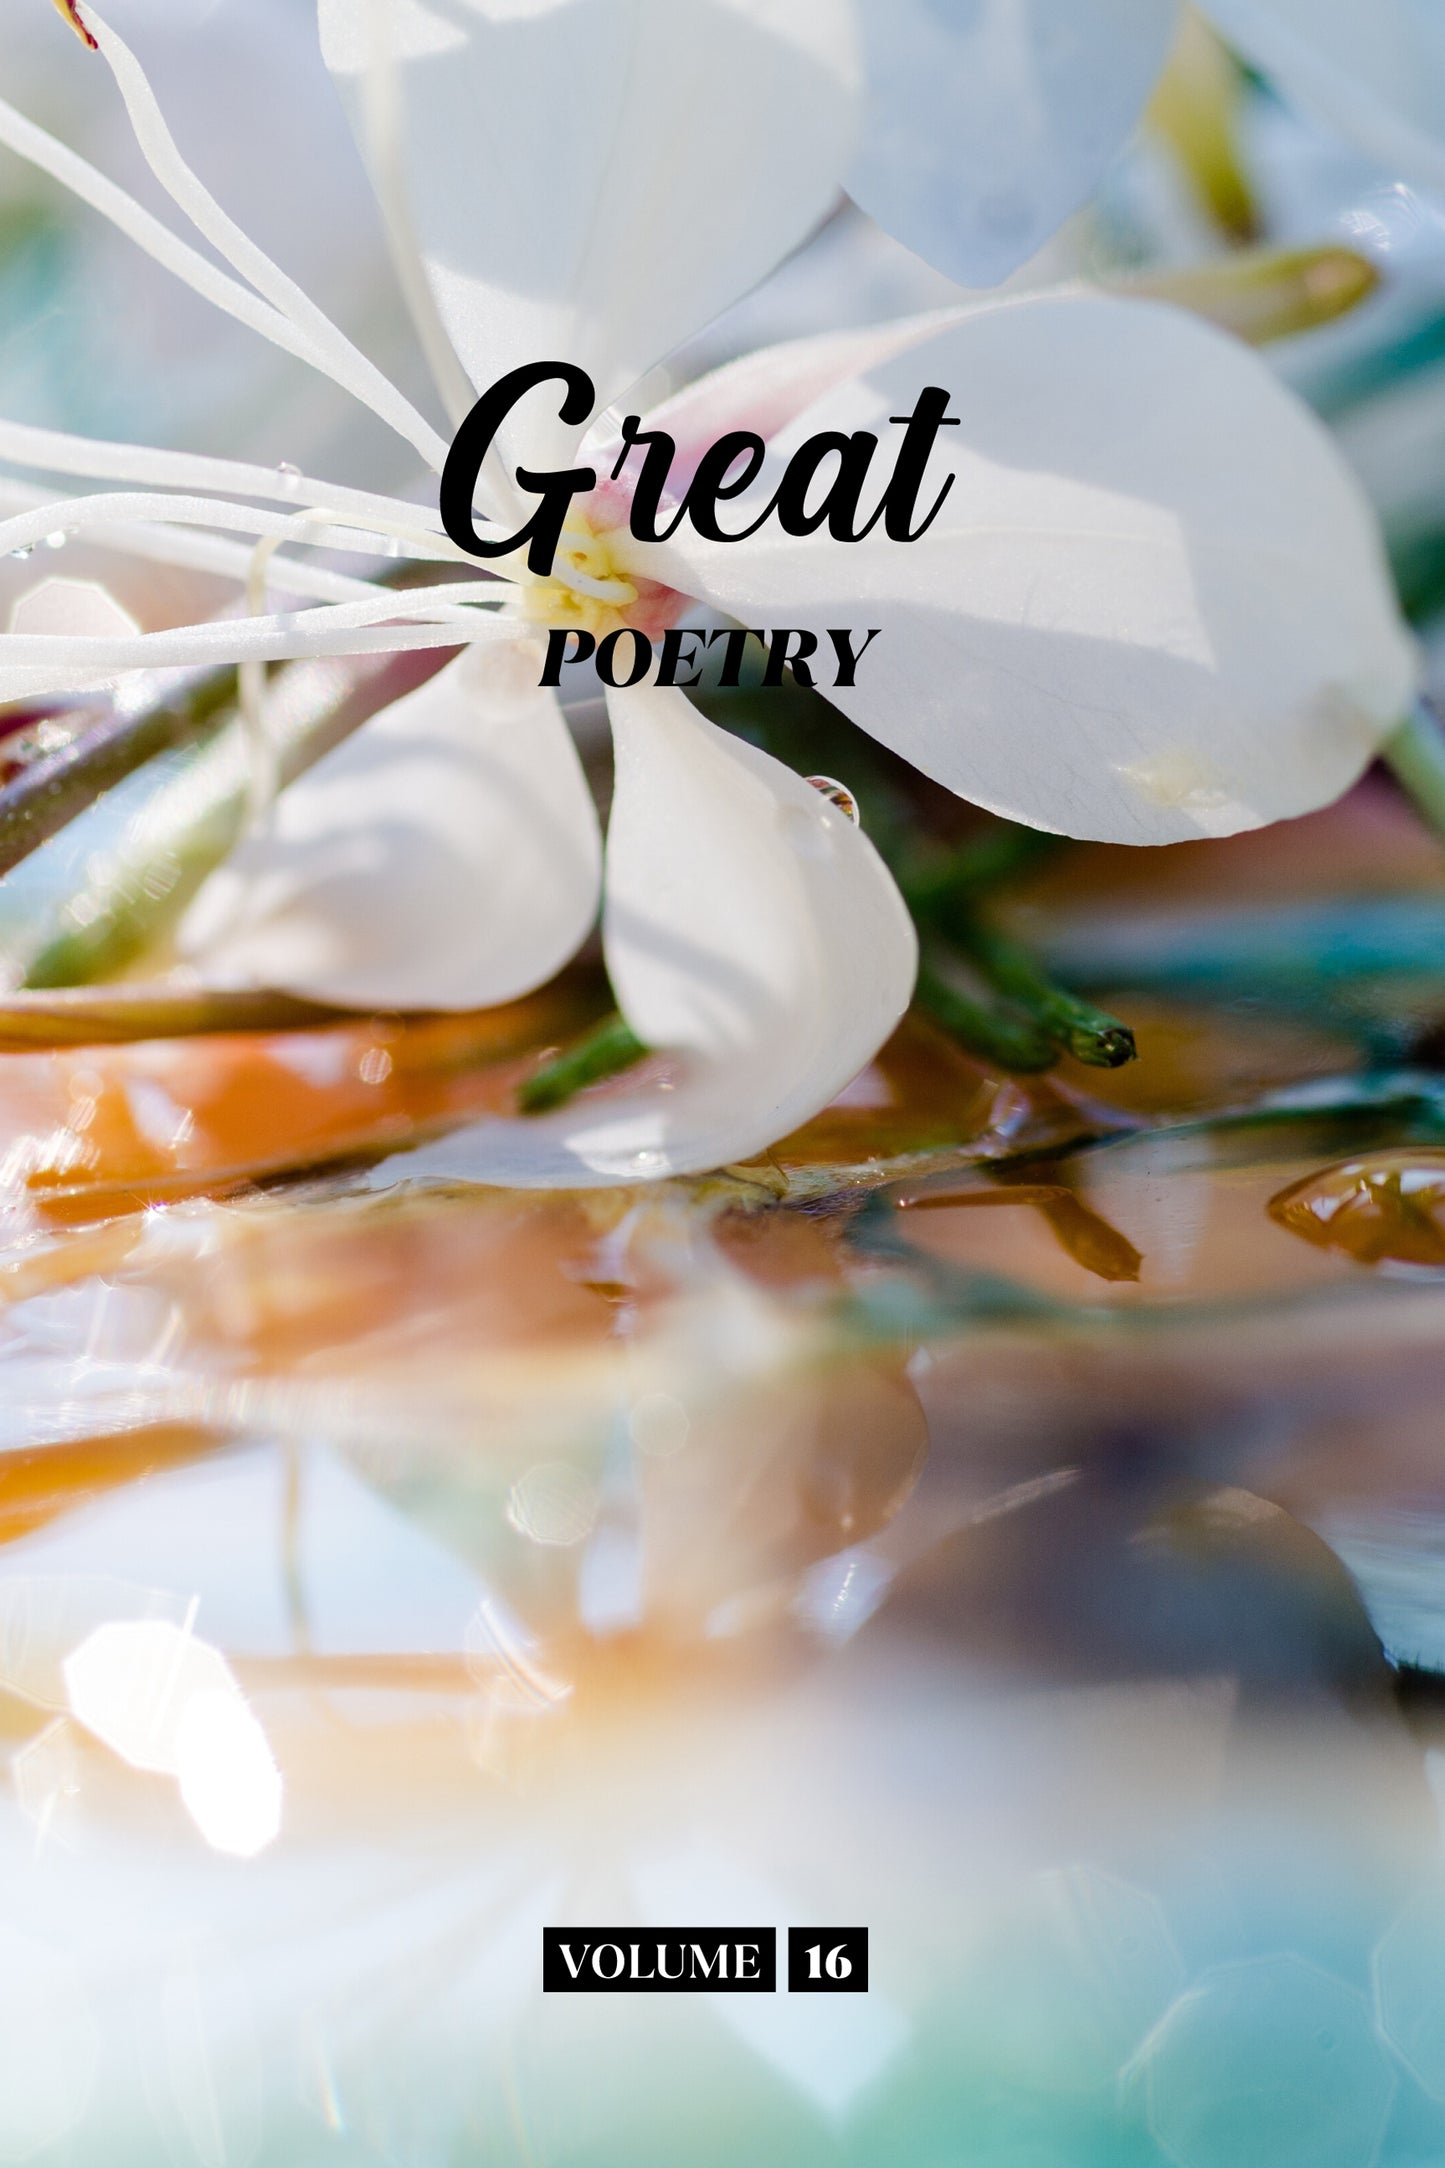 Great Poetry (Volume 16) - Physical Book (Pre-Order)